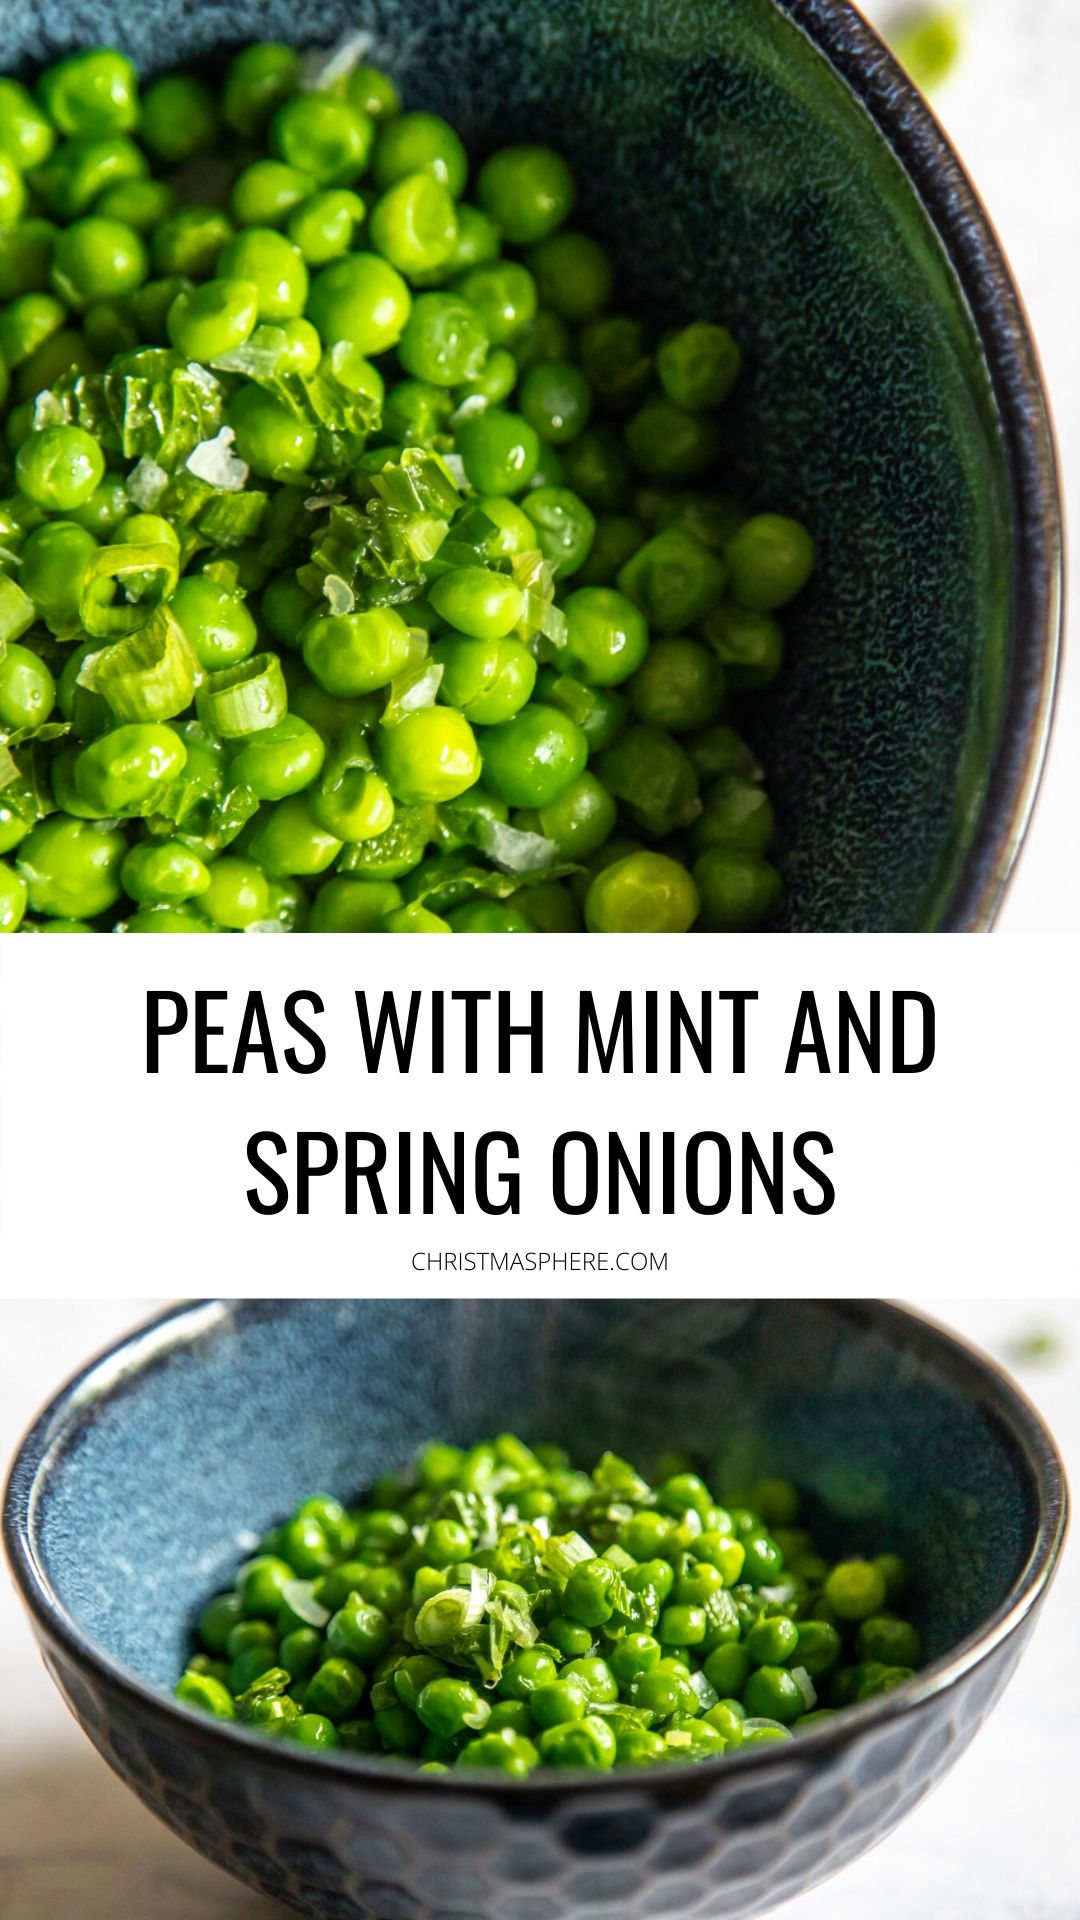 Peas with mint and spring onions